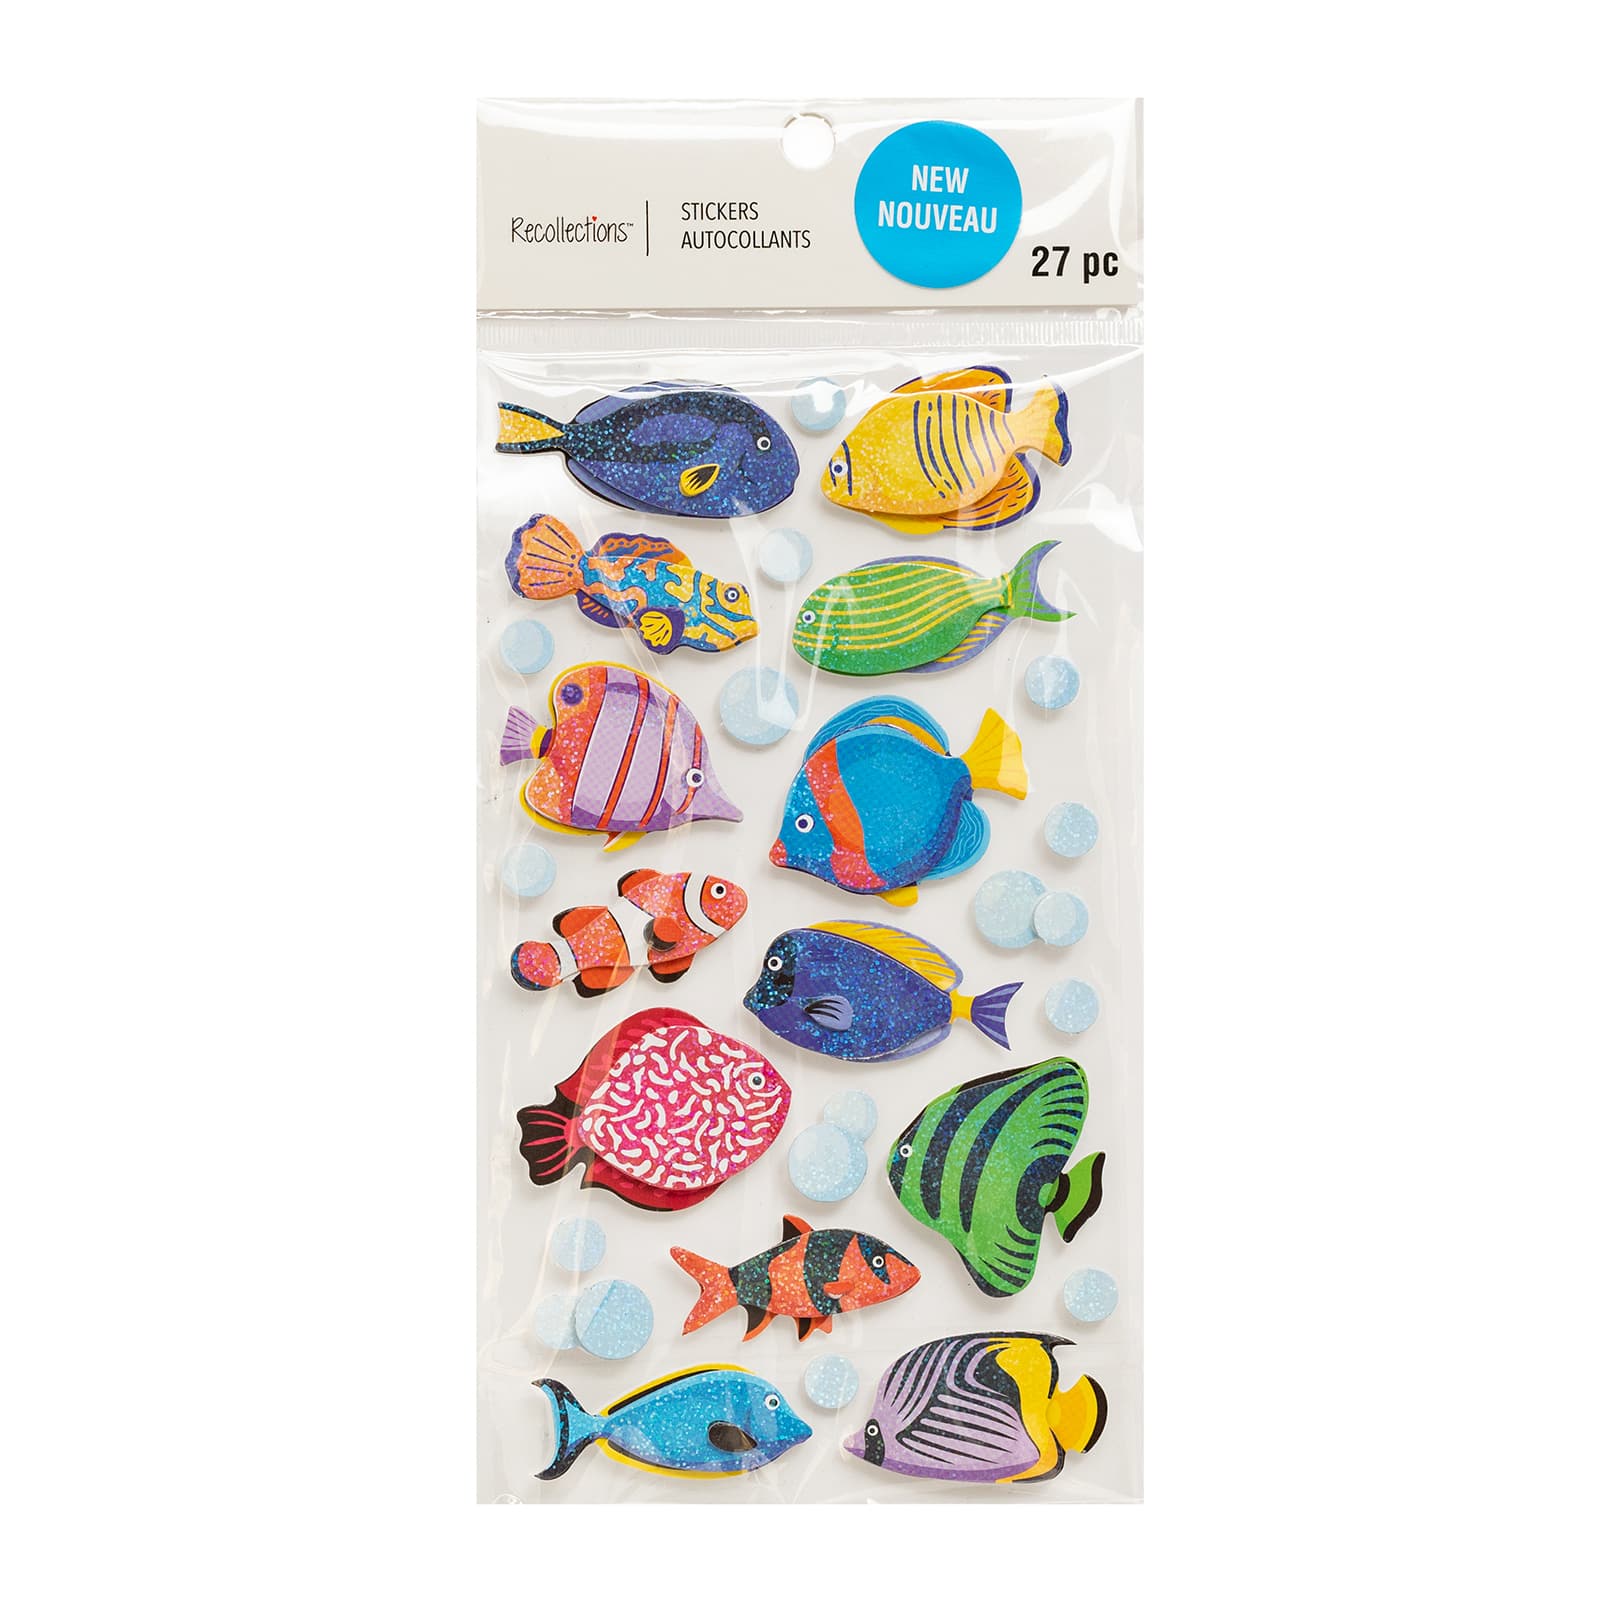 Recollections Fish Stickers - each